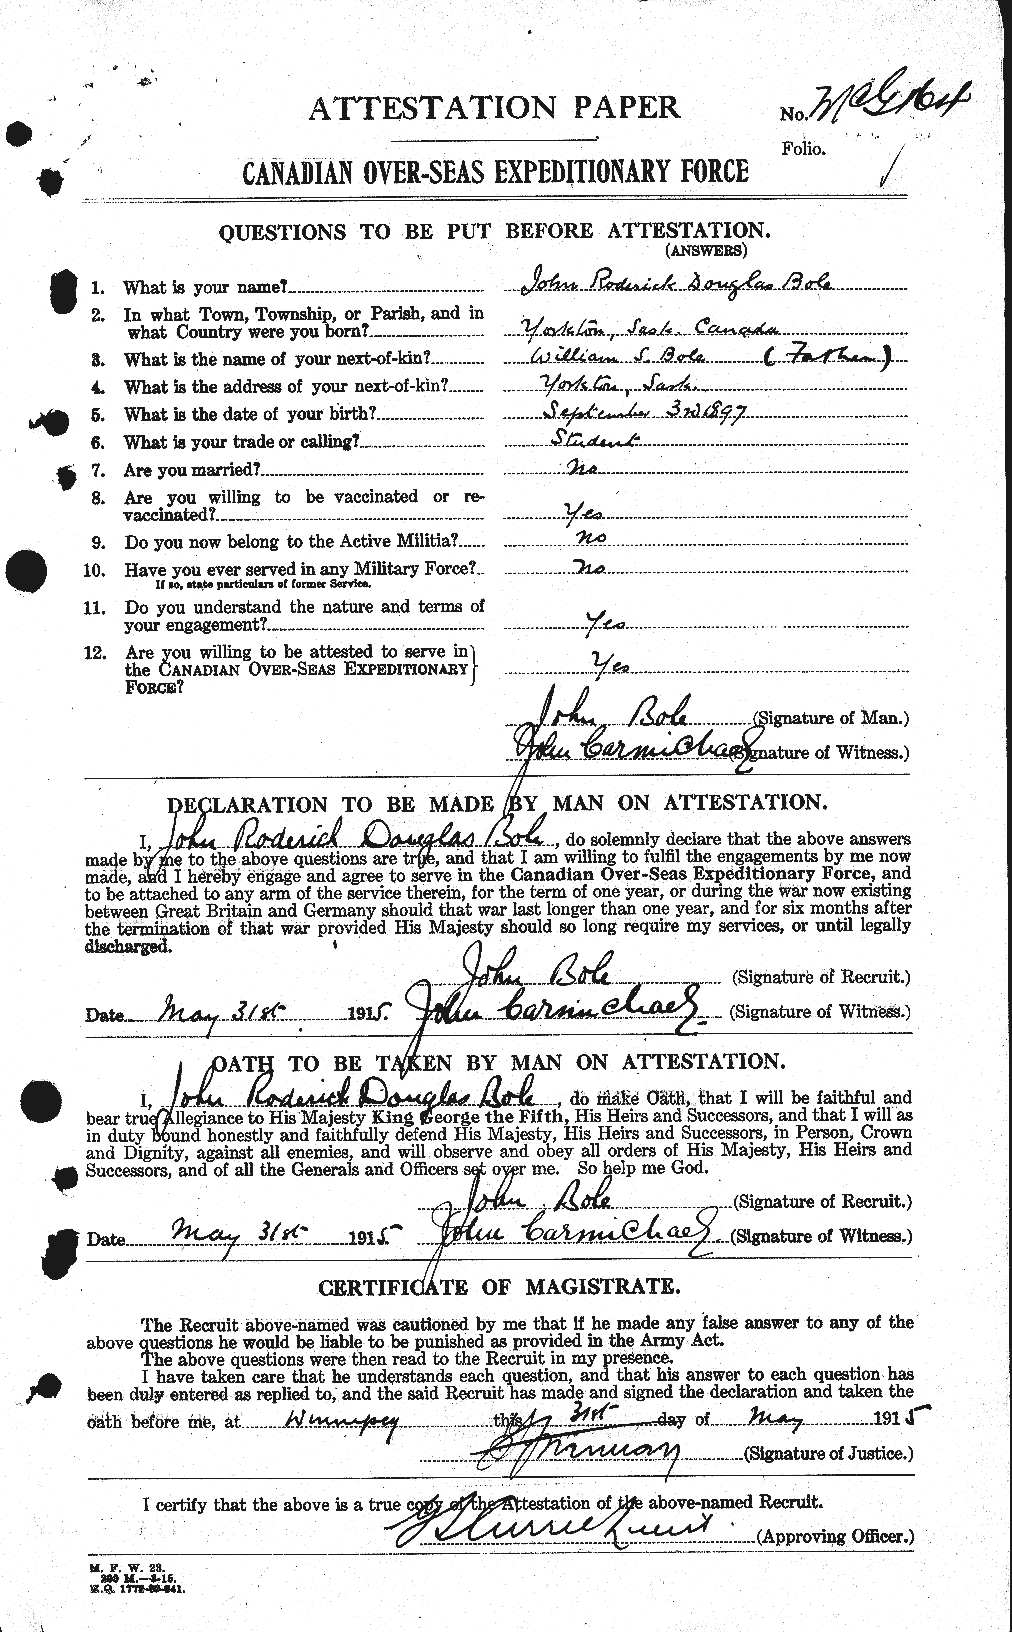 Personnel Records of the First World War - CEF 249787a